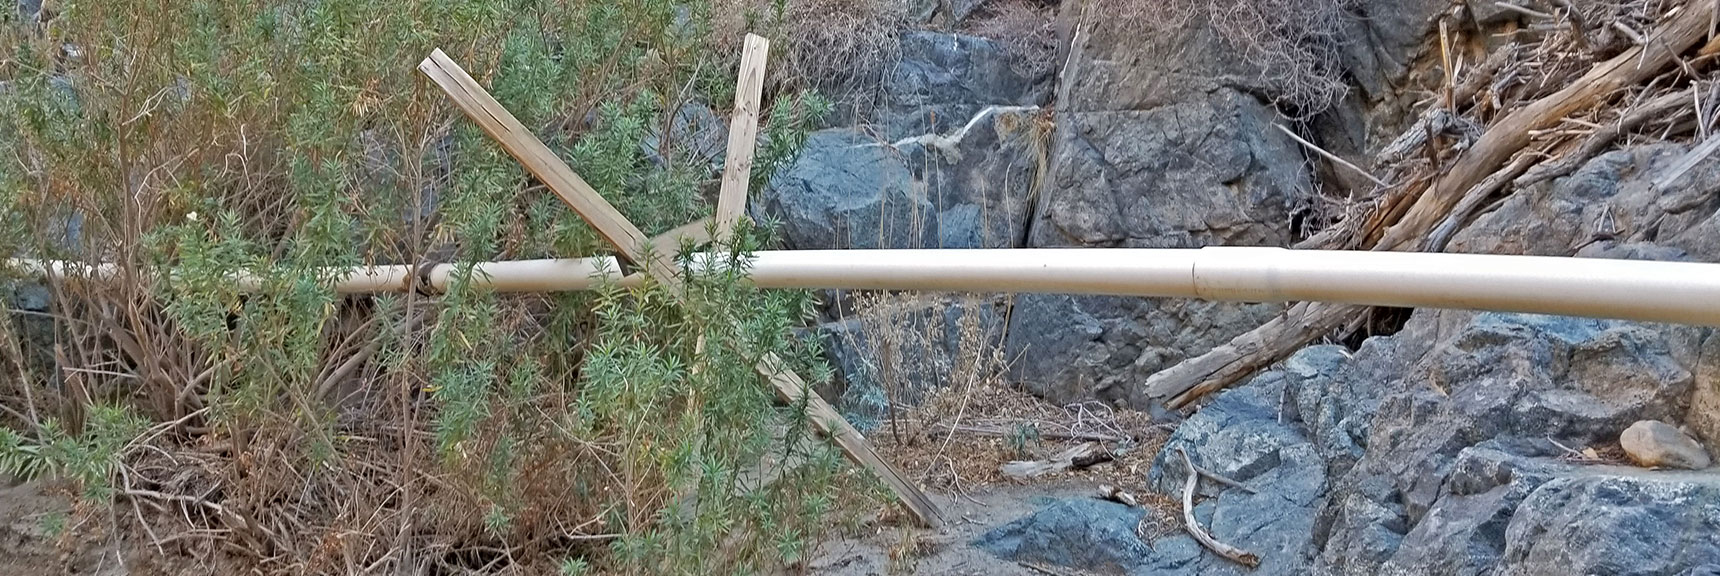 Simple But Effective Engineering to Elevate Panamint Springs Water Pipe. | Darwin Falls, Death Valley National Park, California